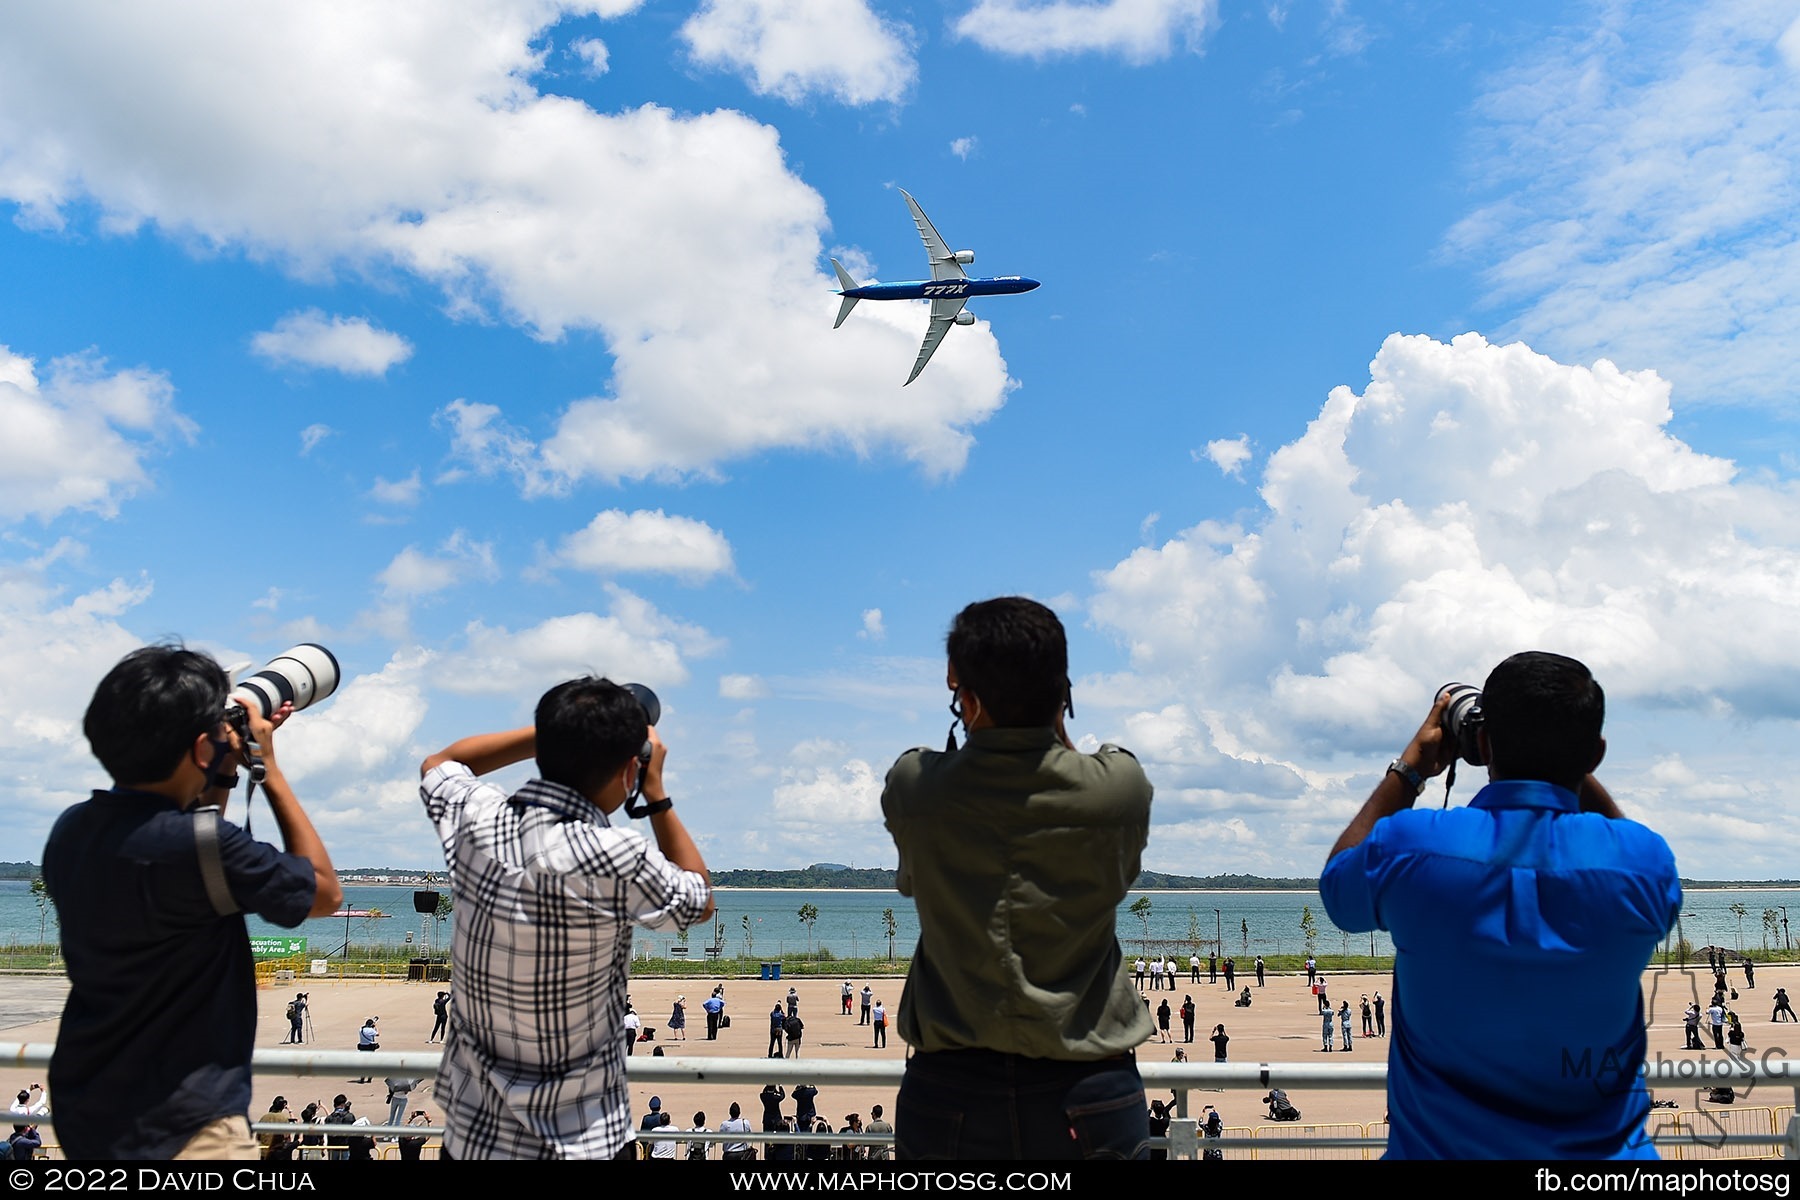 Safe distancing measures observed while photographers click away at the Boeing 777X